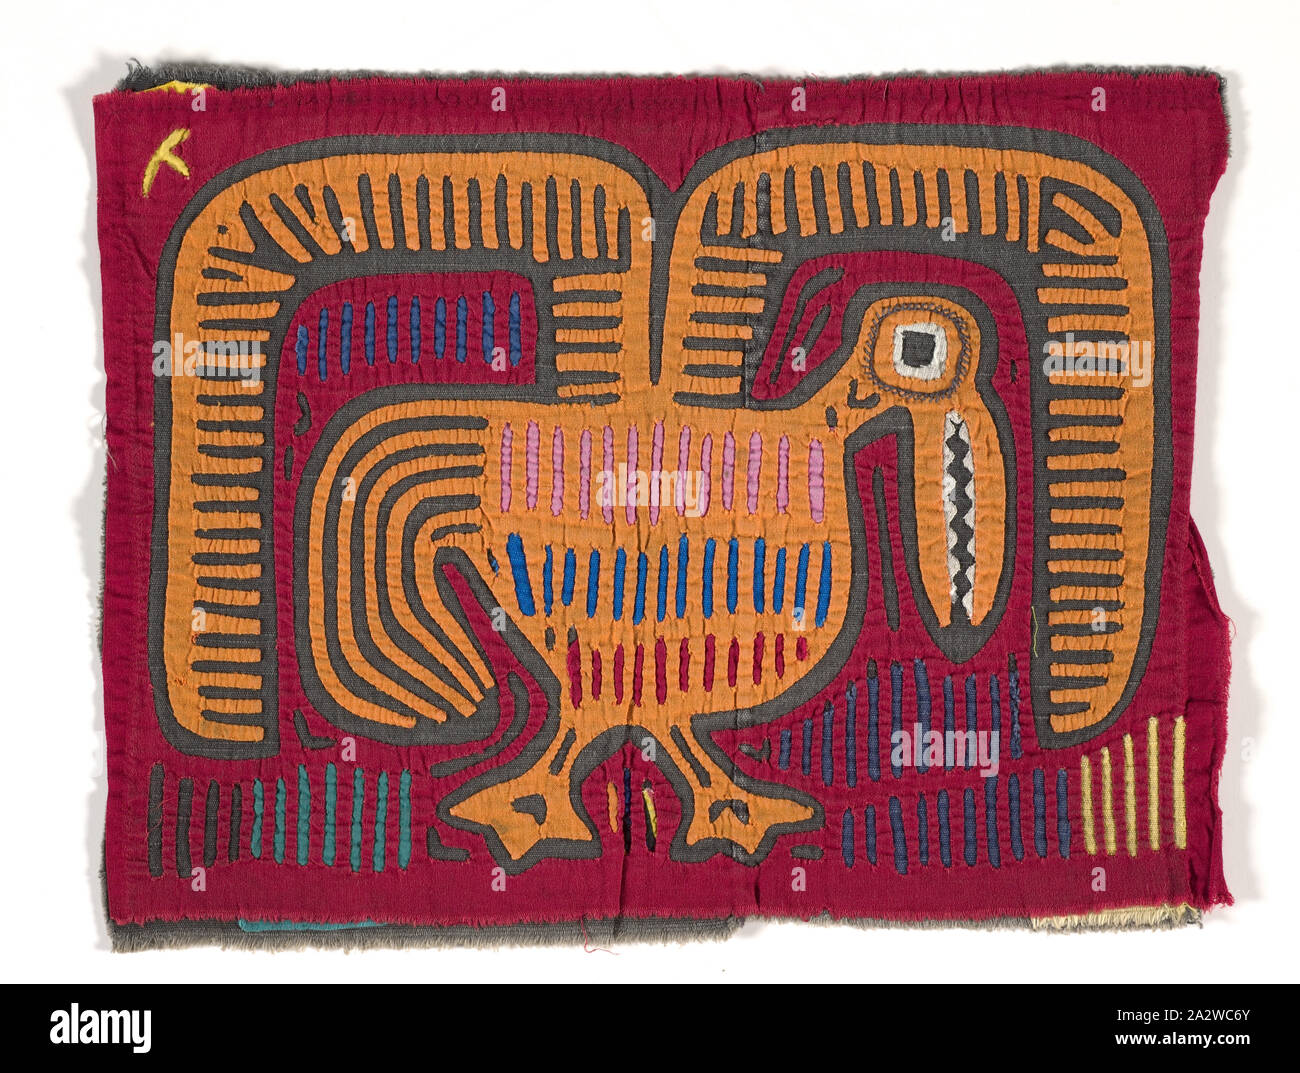 shirt panel (mola), Kuna people, about 1950s, appliqued cotton, 10-1/2 x 13-5/8 in., Textile and Fashion Arts Stock Photo